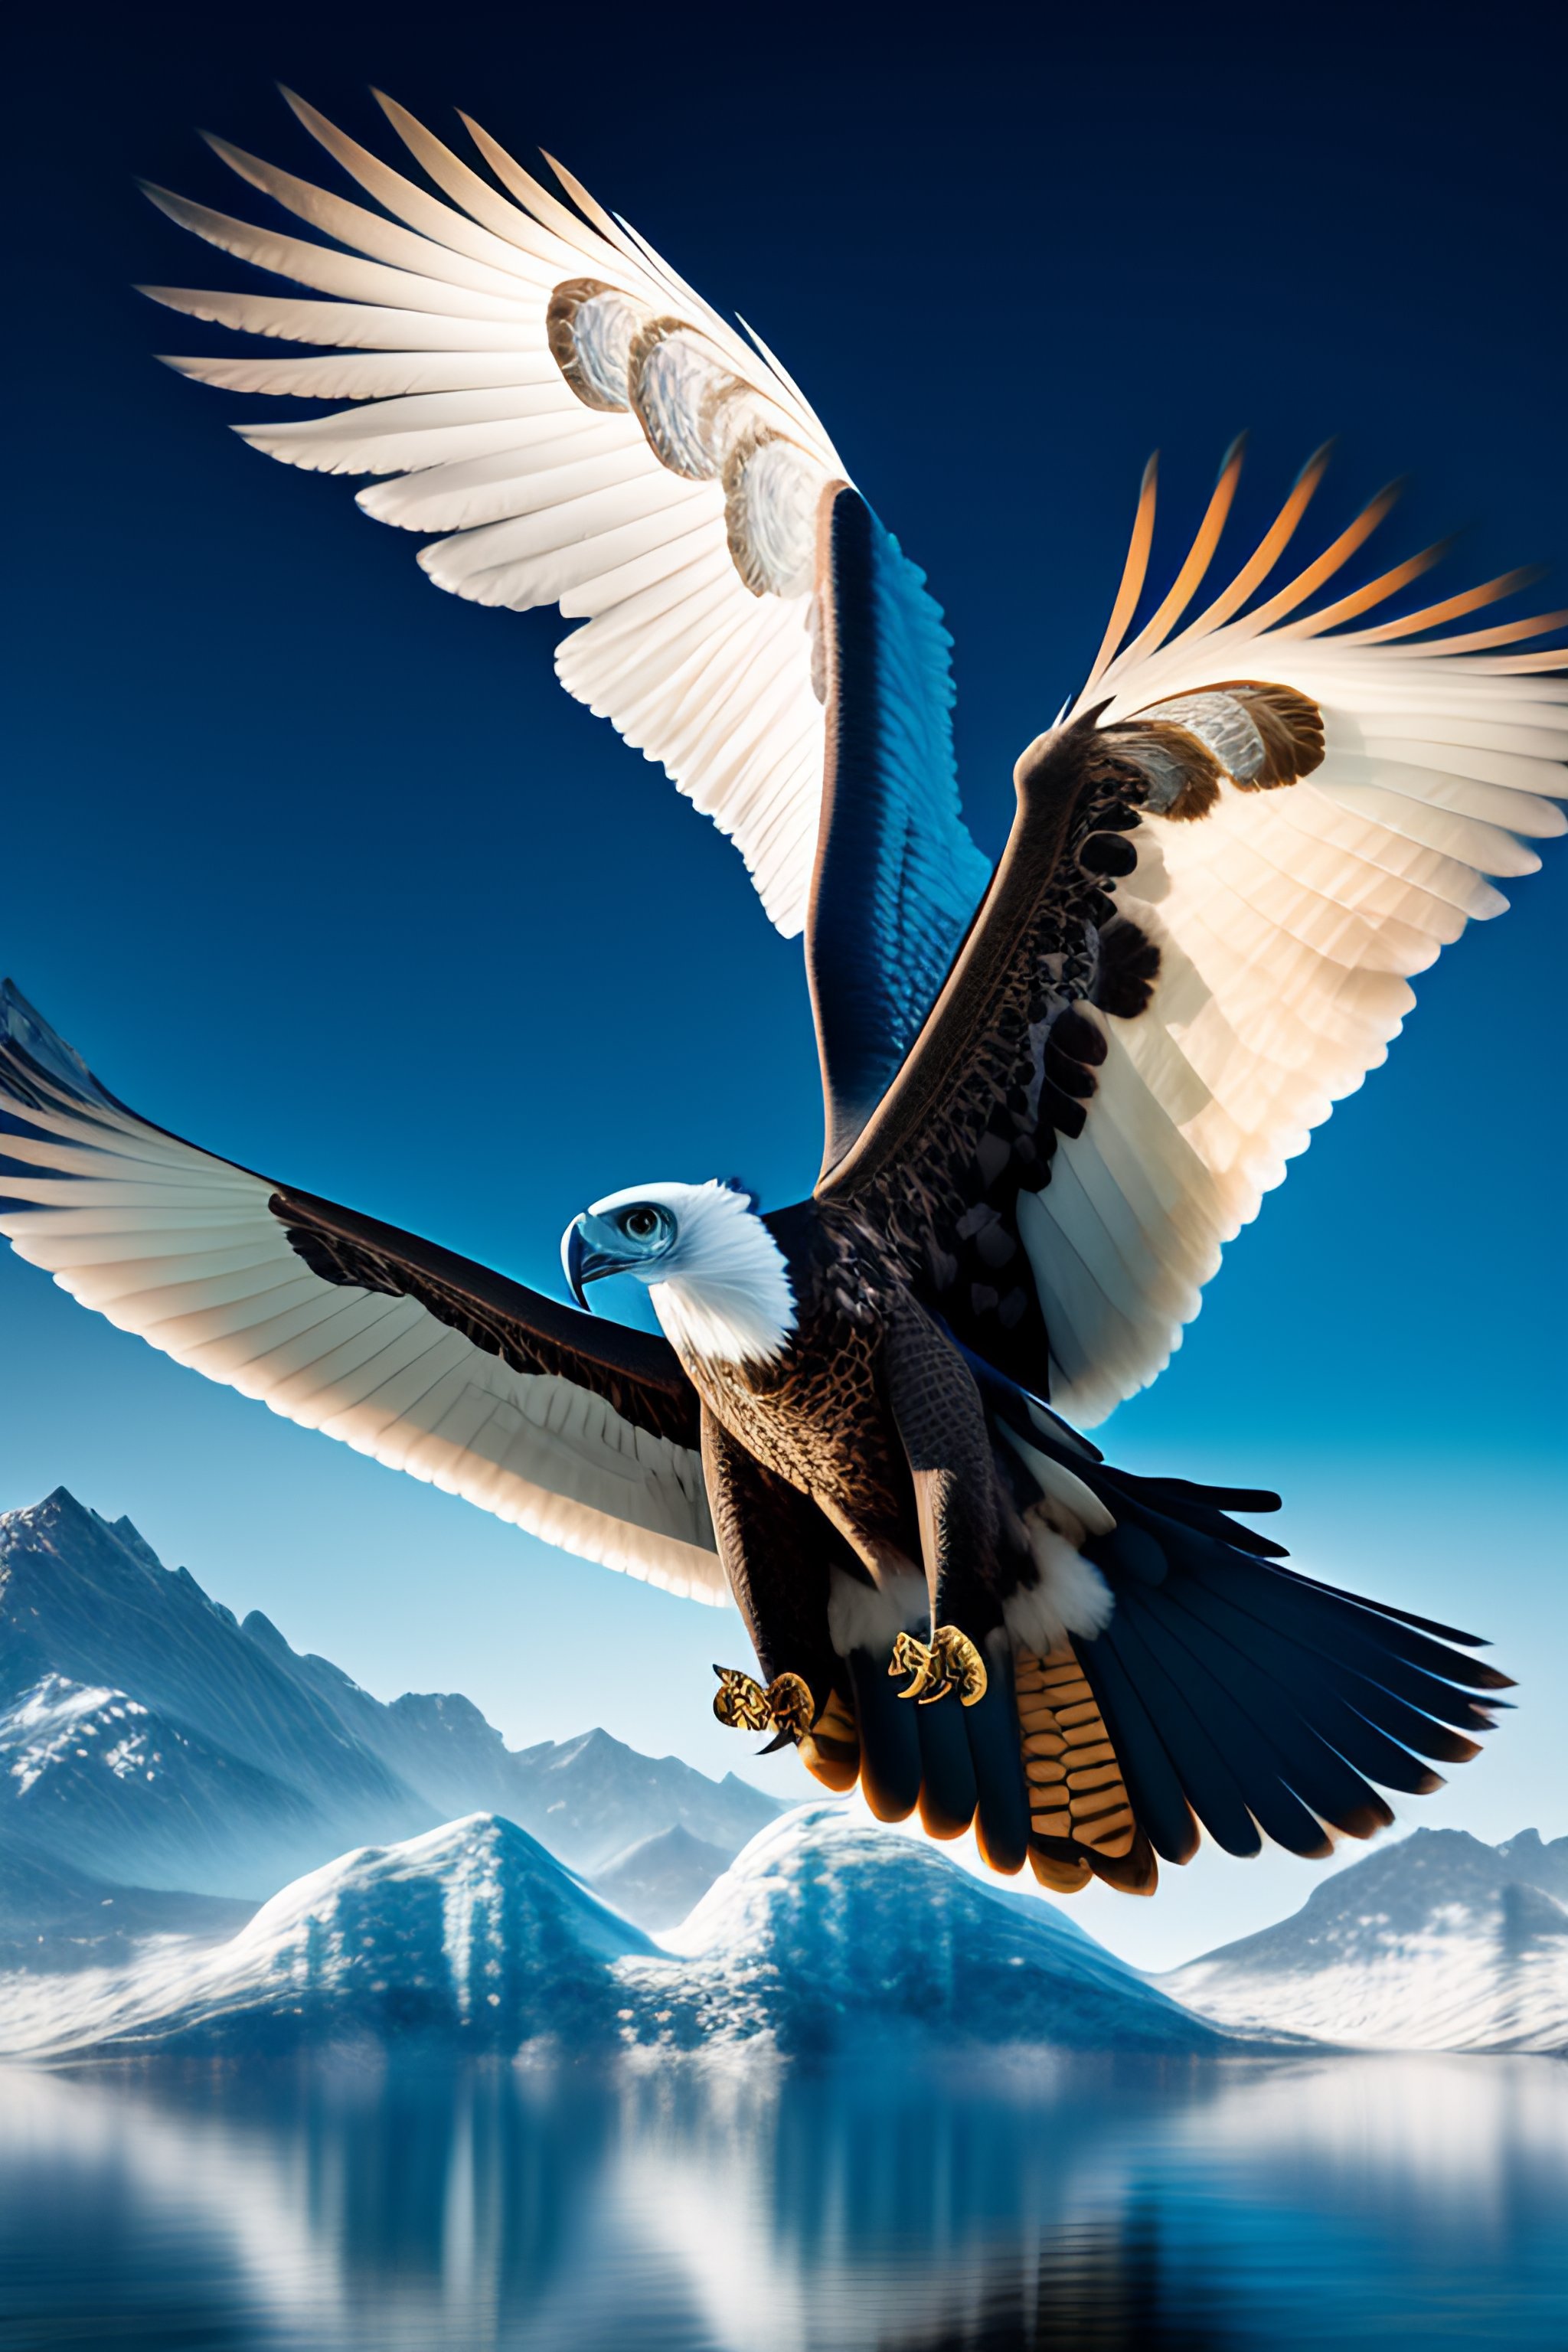 Lexica - Beautiful intricately detailed flying harpy eagle and Alaskan  Indian, giant mountains, bio luminescent, plasma, ice, water, wind,  creature